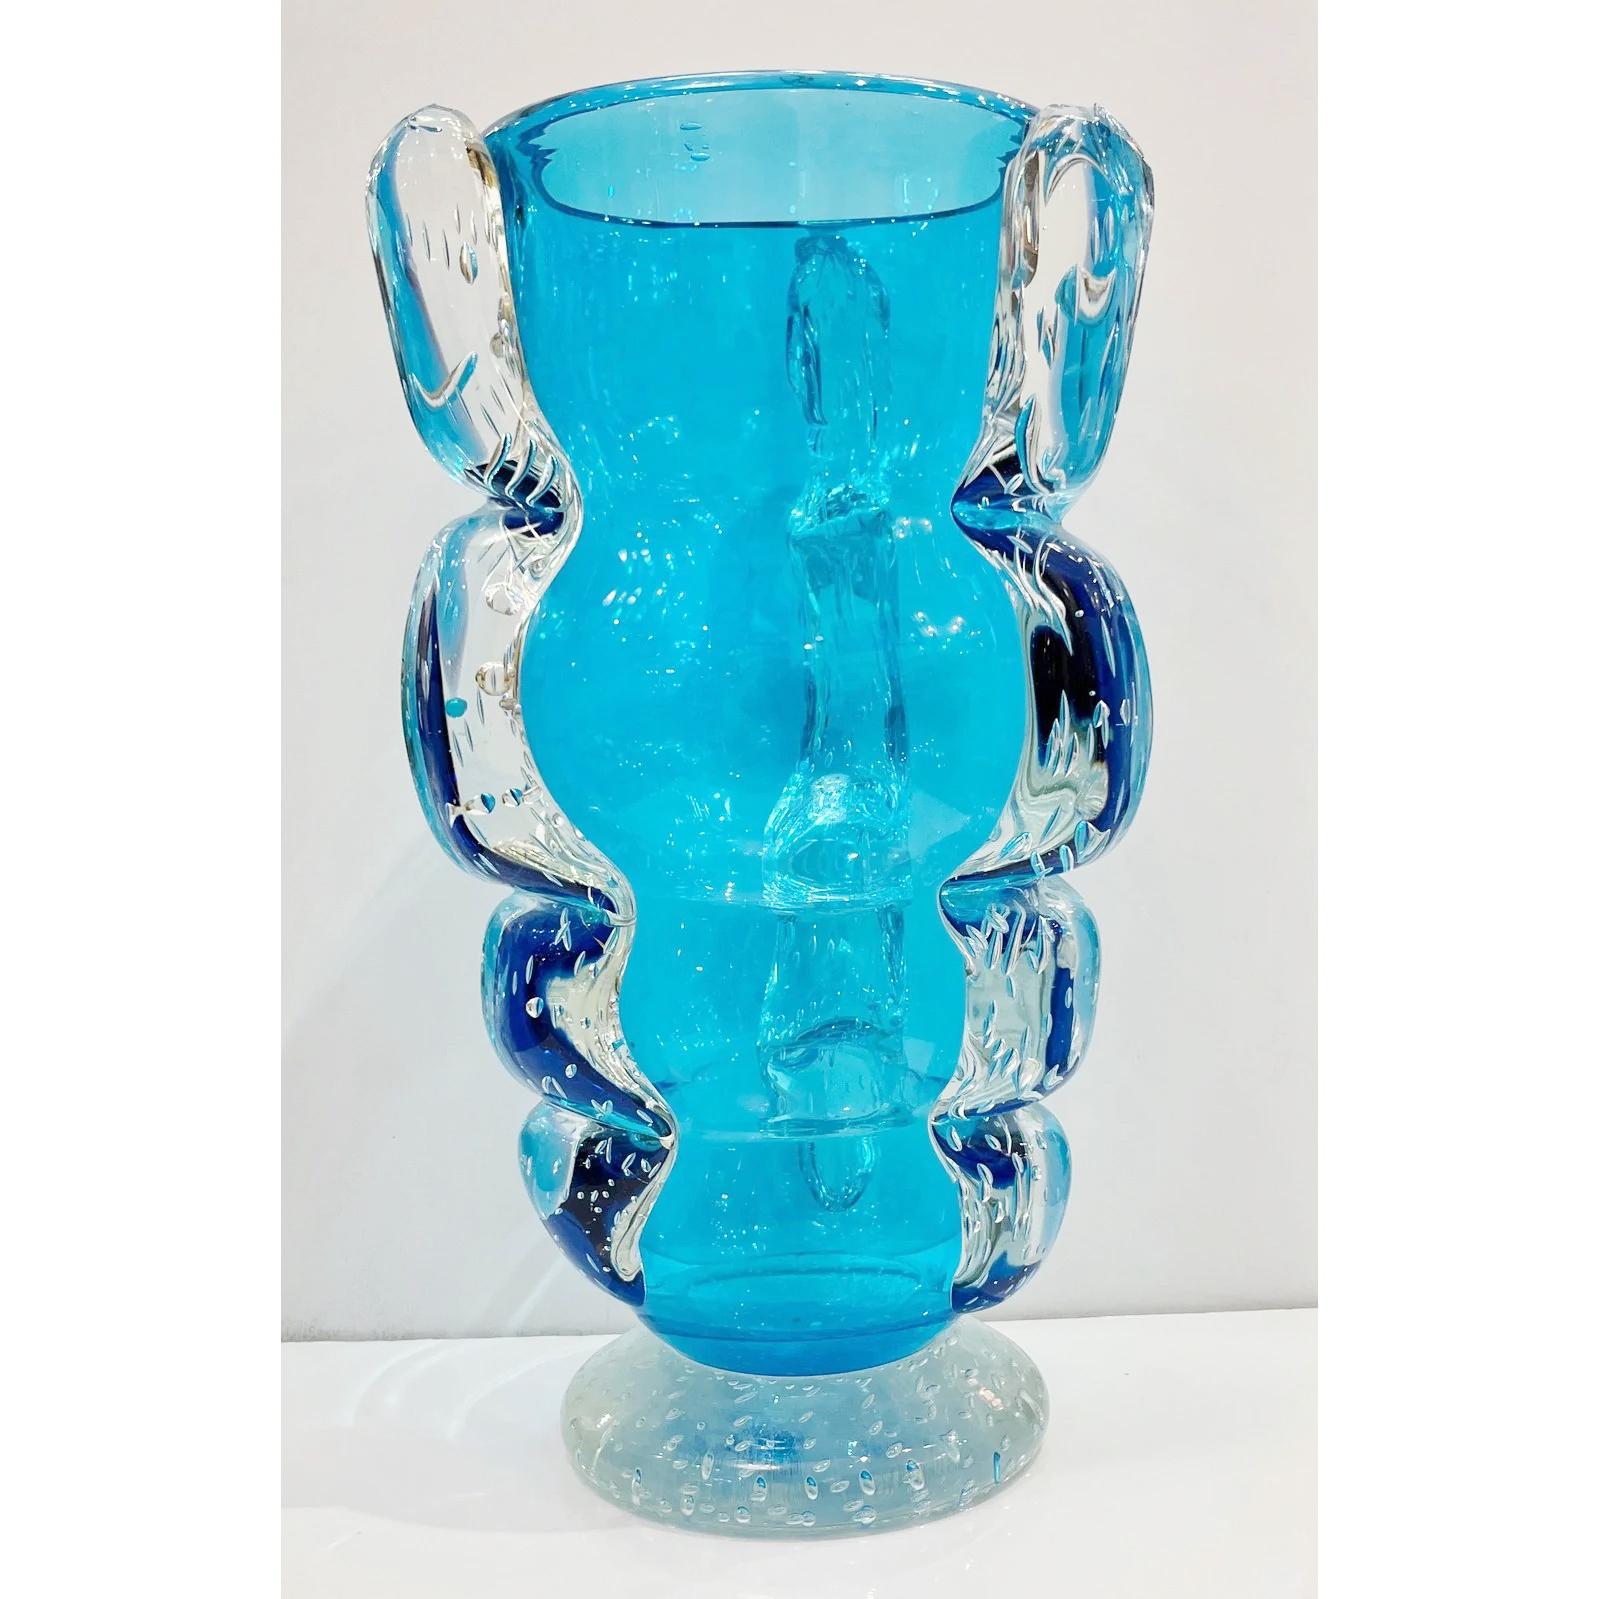 Late 1970s vase in very thick and quality blown Murano glass in an unusual translucent aqua blue color, with a rare wavy form. The body shows a triple decoration of clear glass in relief, worked with bubbles to match the base, that enhances the